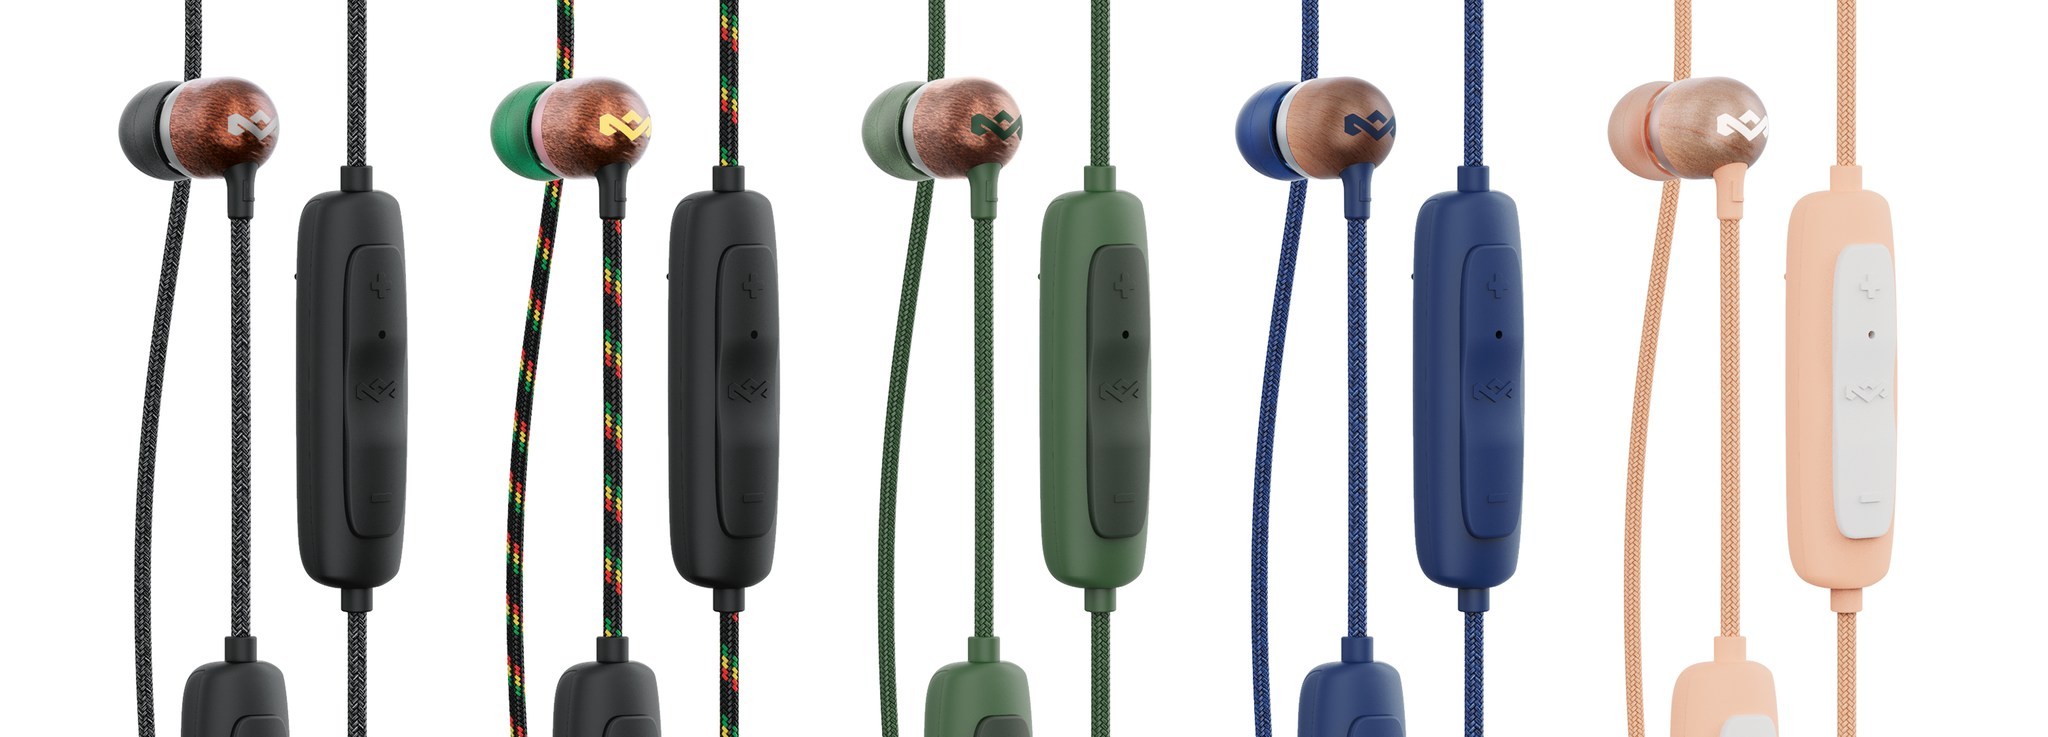 House Of Marley Moves To 100% Recyclable Packaging With Launch Of The Redesigned Smile Jamaica And Smile Jamaica Wireless 2 Earbuds